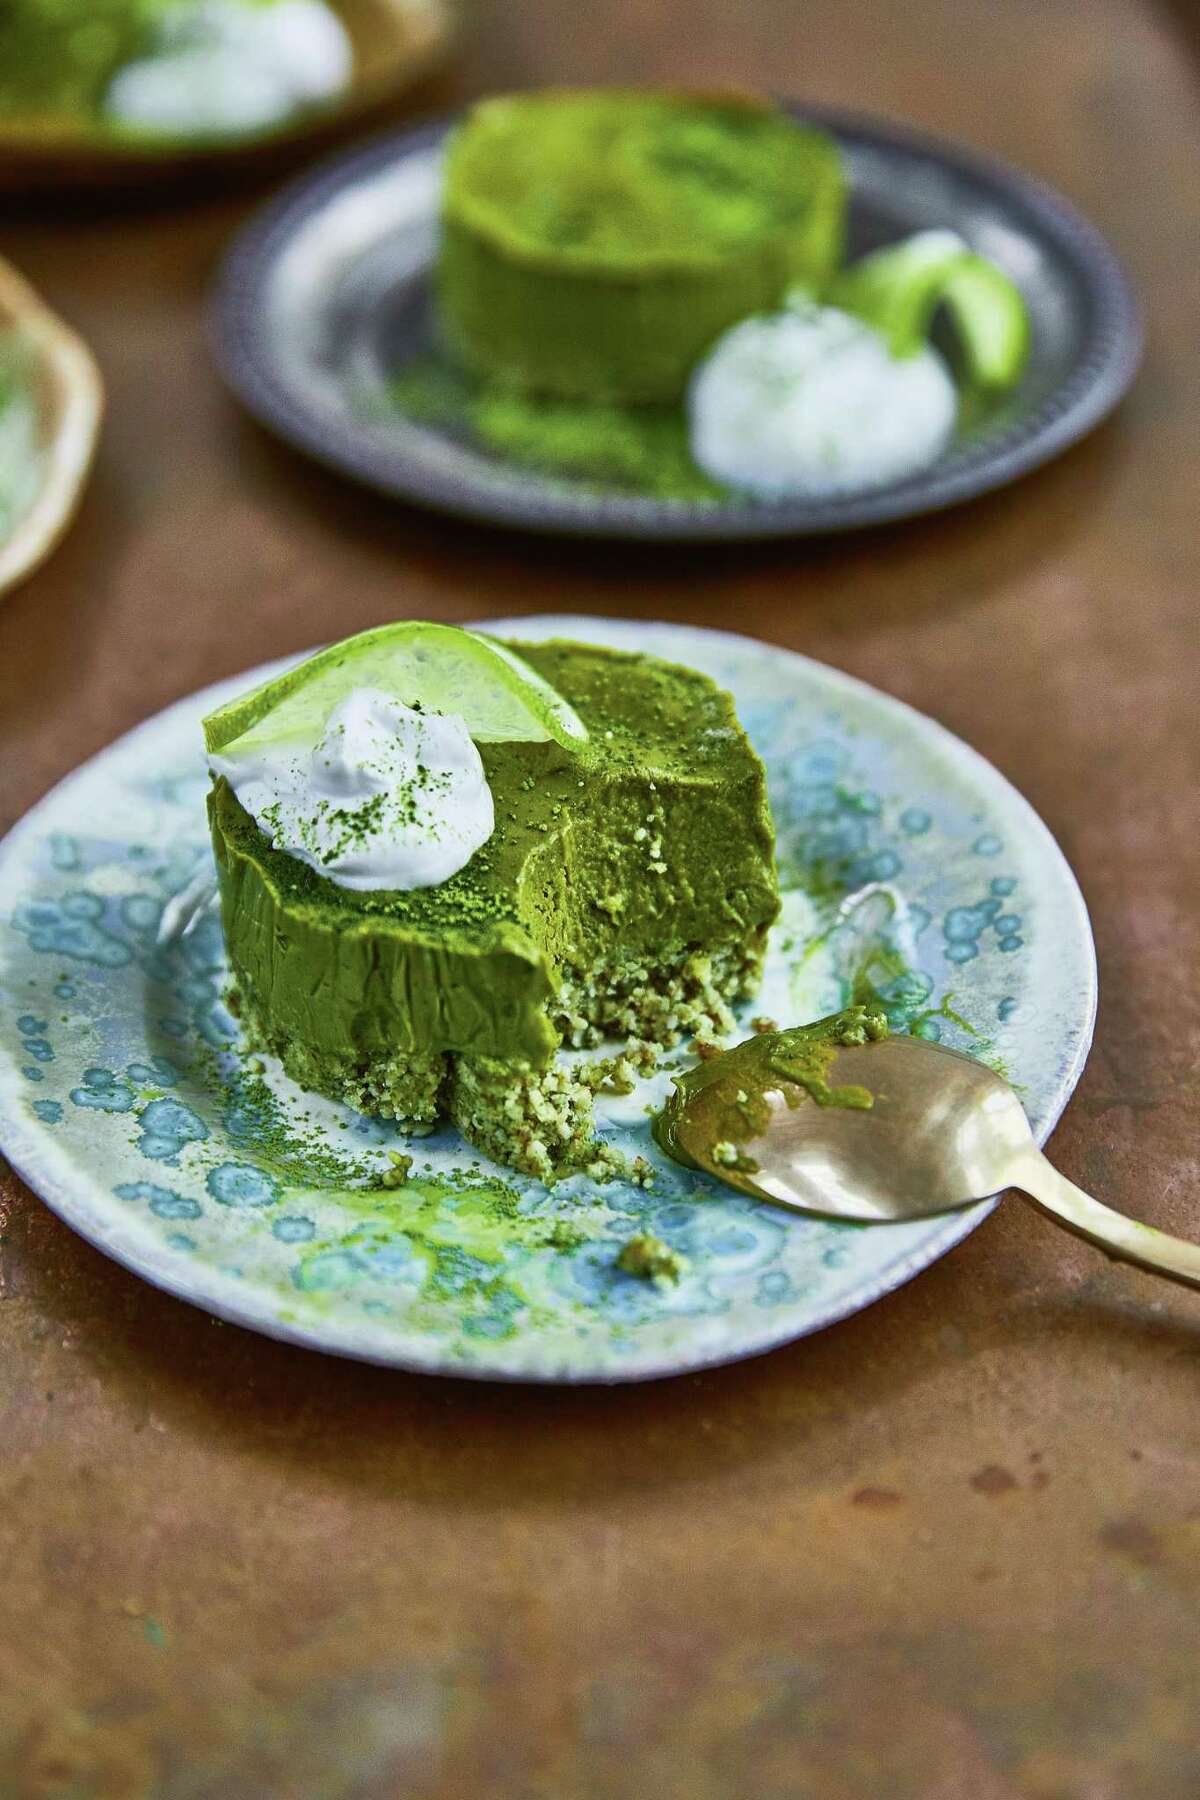 Matcha Lime Avocado Cakes from “Farmacy Kitchen Cookbook” by Camilla Fayed